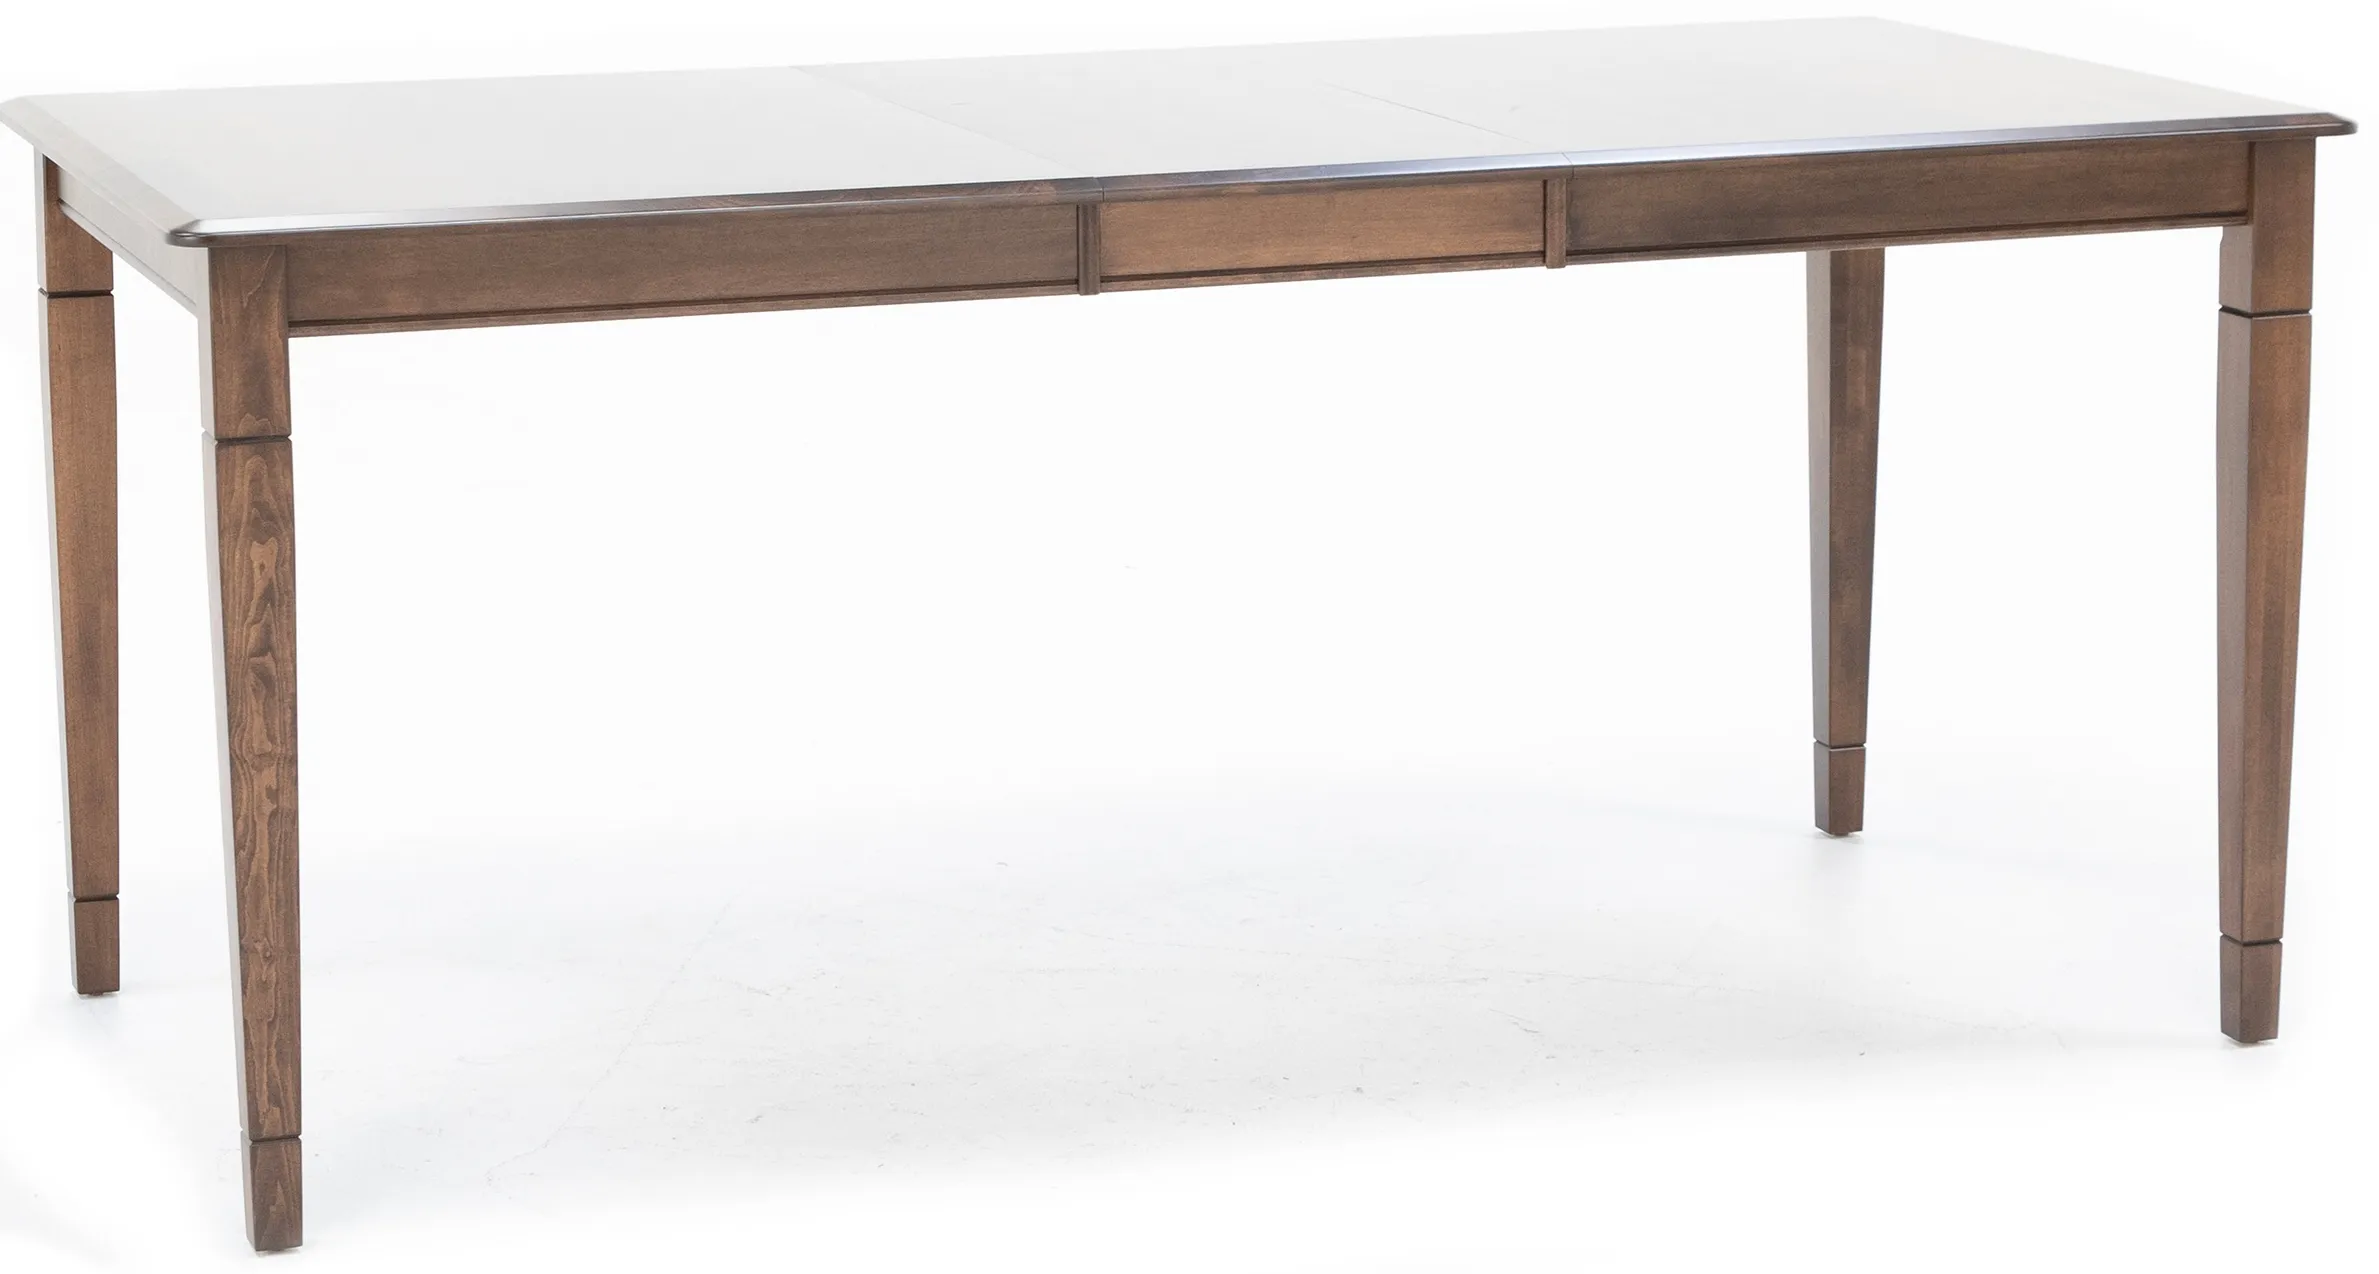 Anniversary II 66-84" Counter Height Table in Walnut